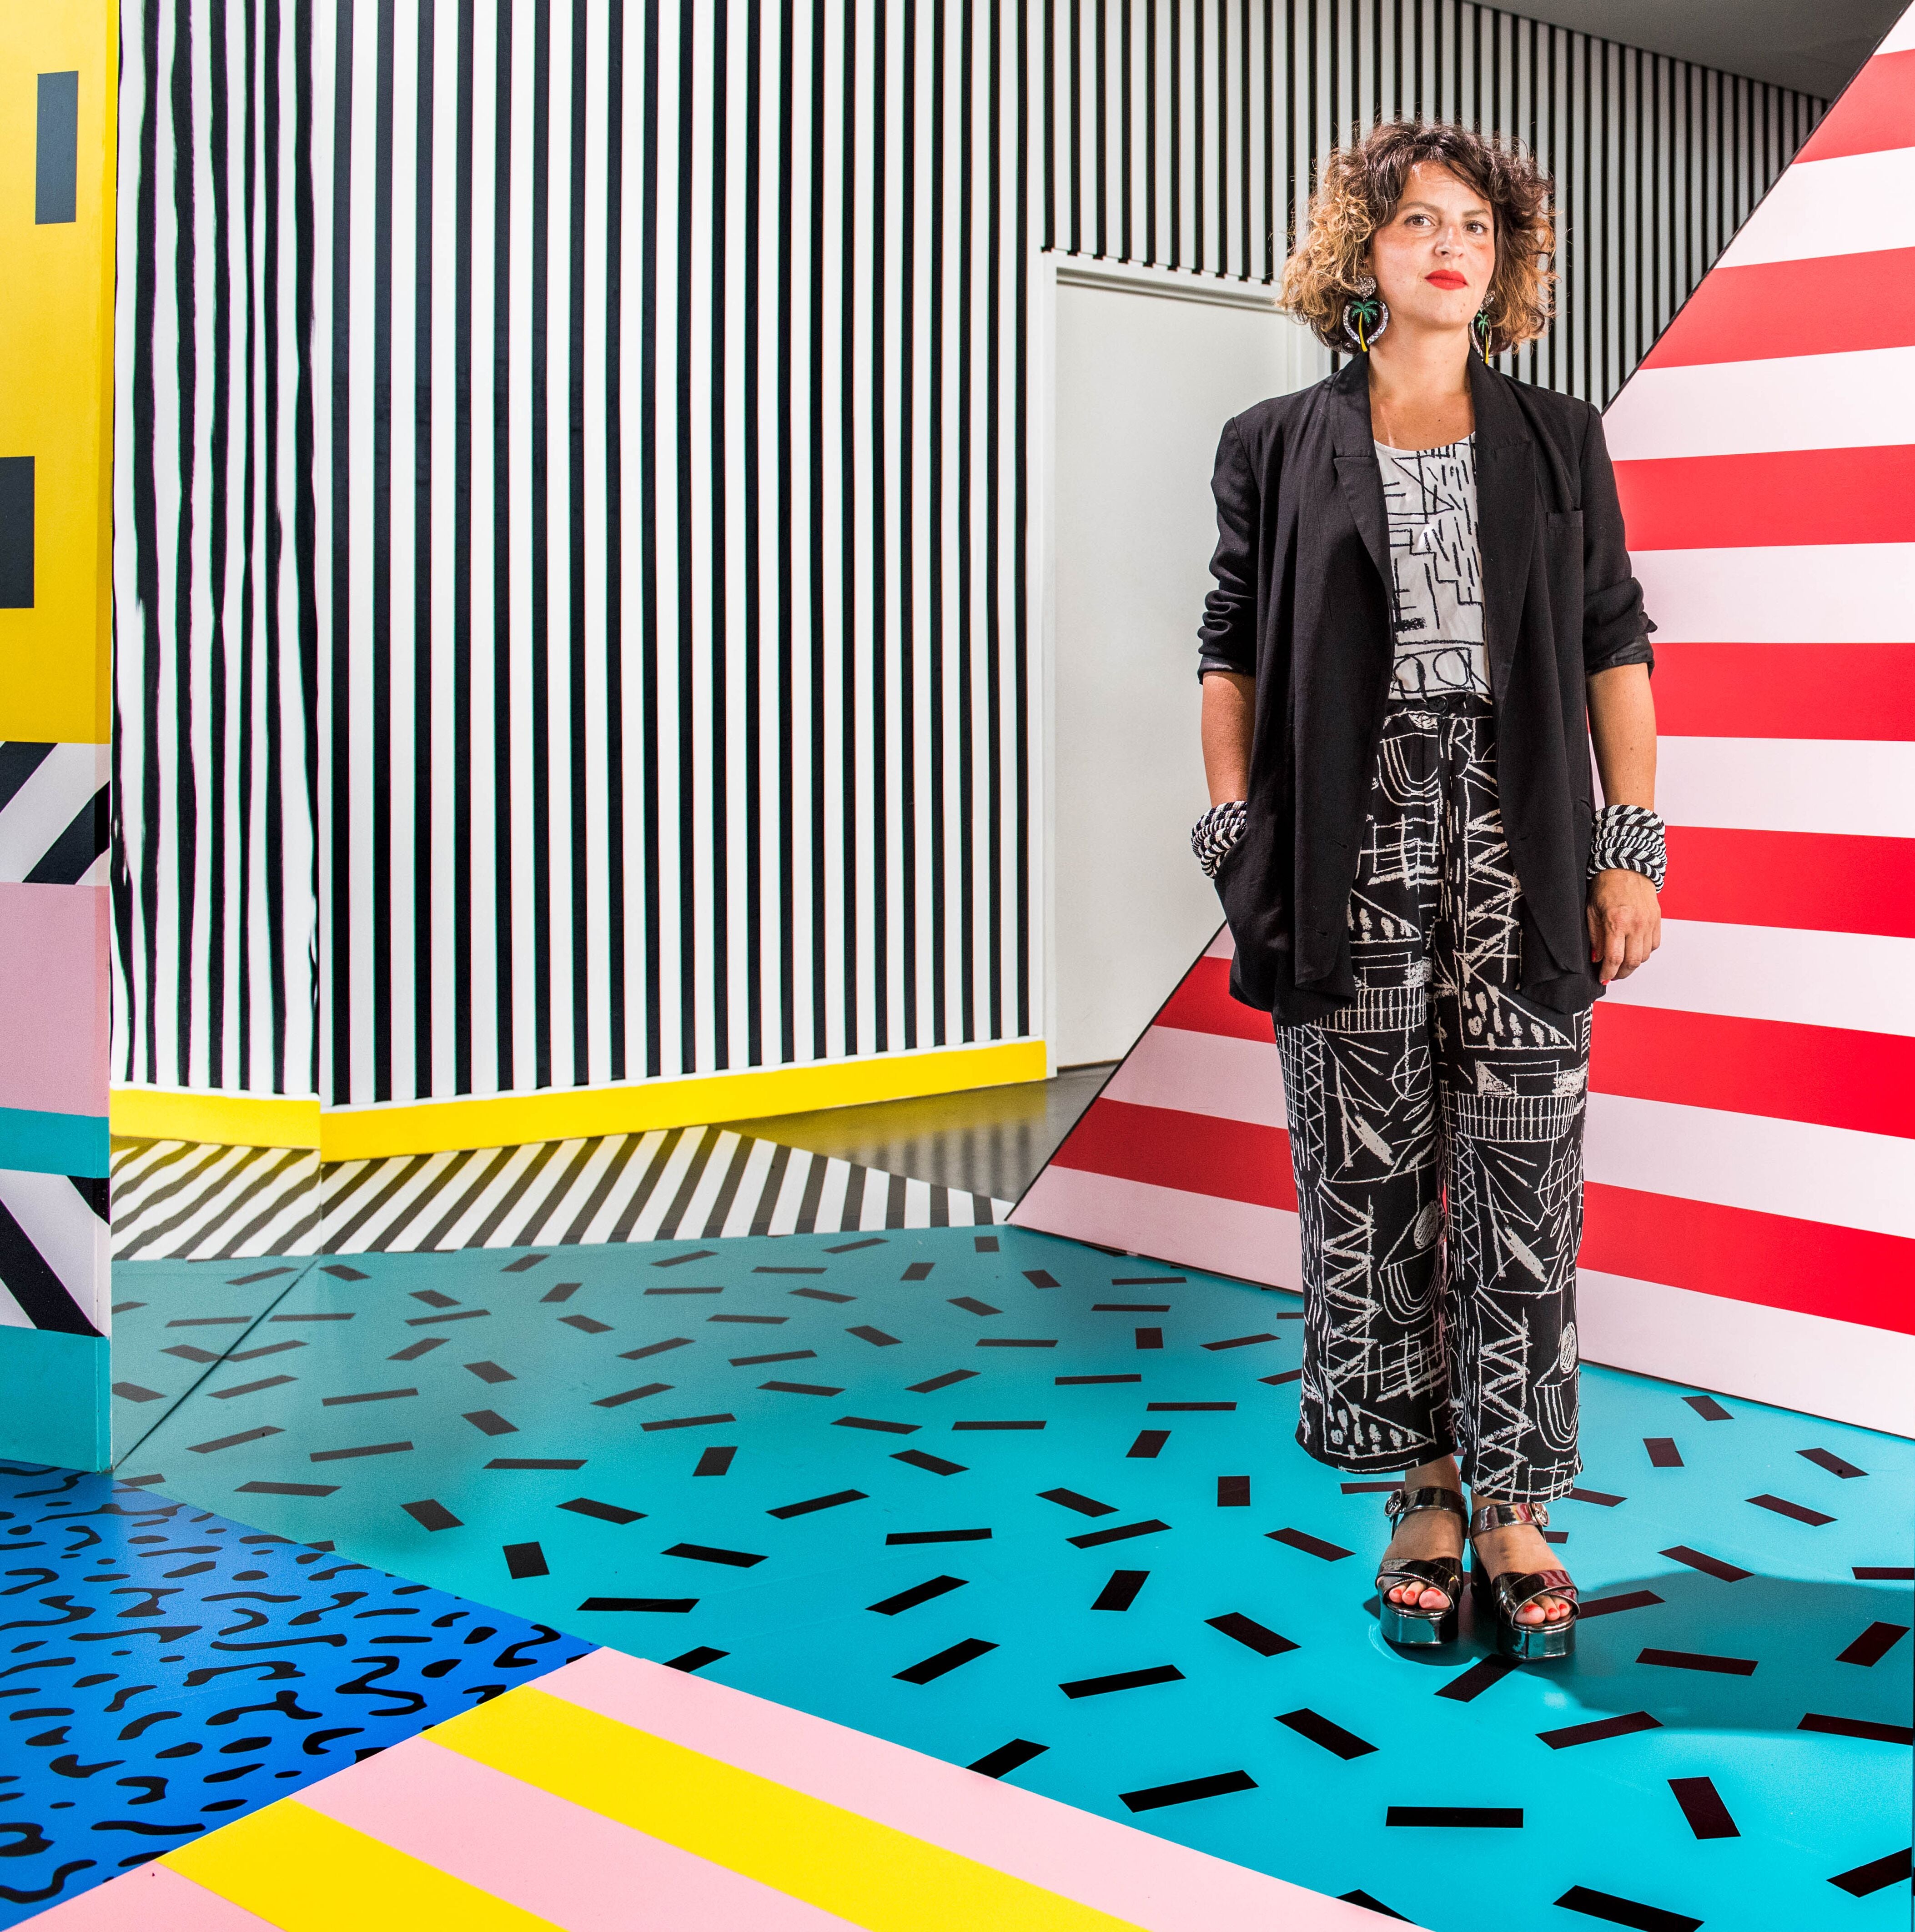 Design Star Camille Walala Shares the Secret to Pairing Prints and Colors Without Fear